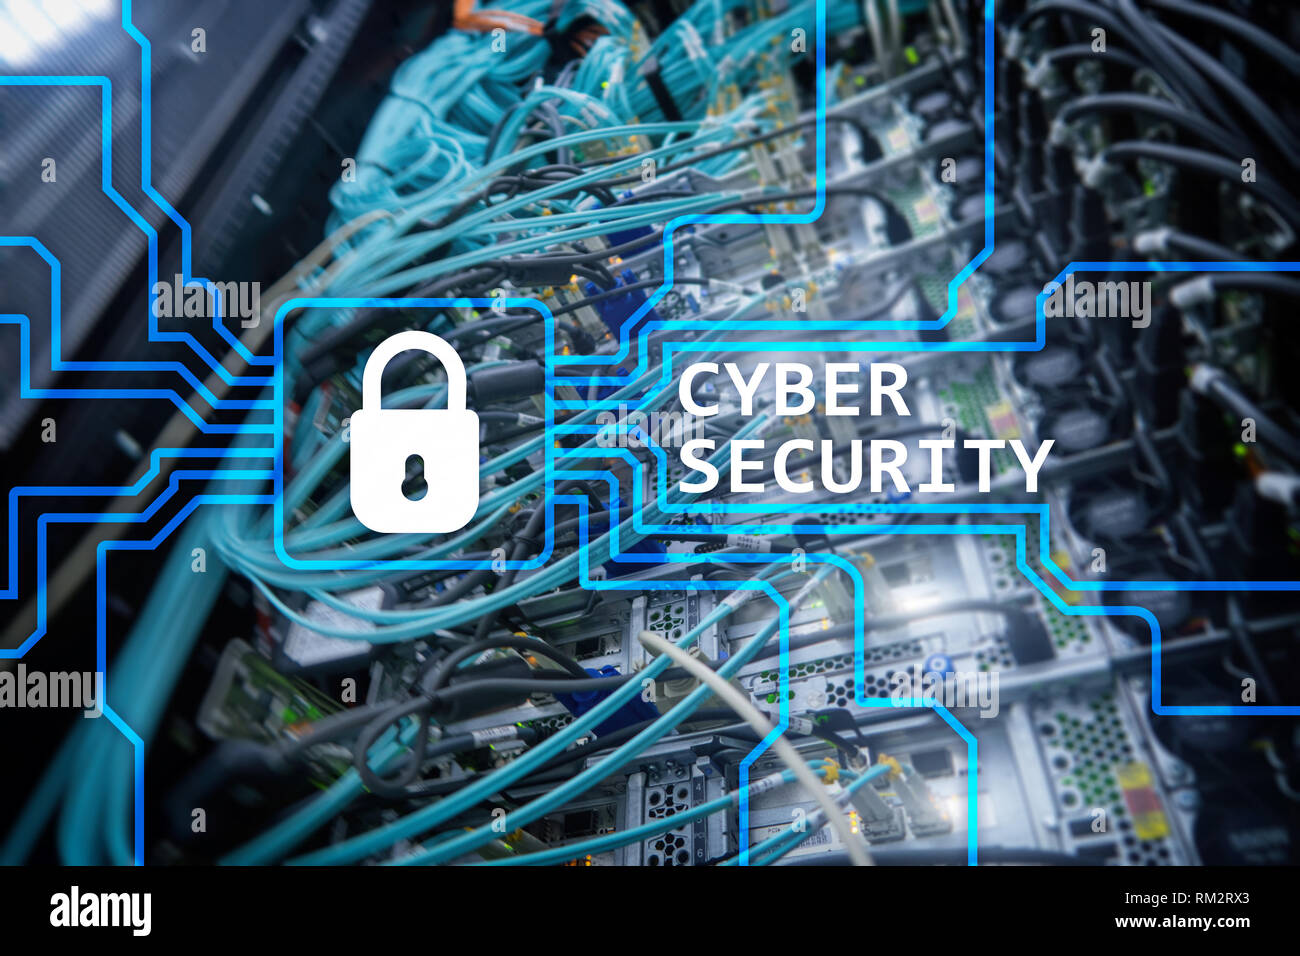 Cyber security, information privacy and data protection concept on server room background Stock Photo